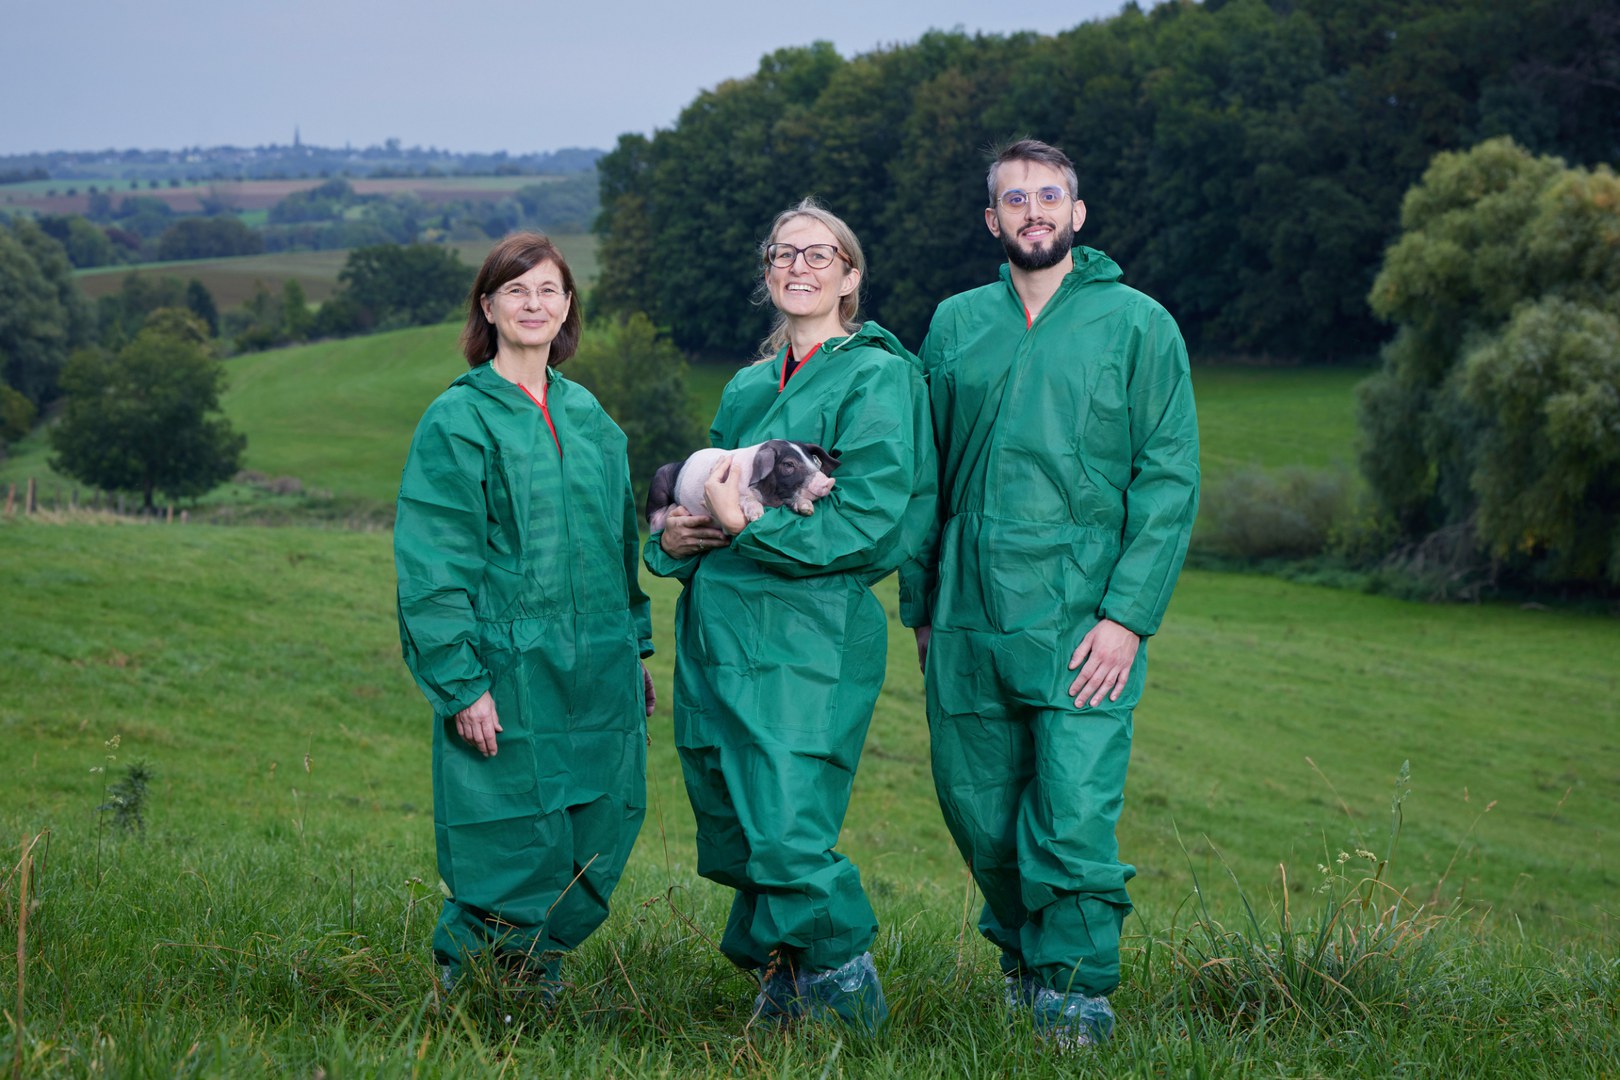 The team (left to right) in hygienic protective clothing with a piglet: - Prof. Dr. Monika Hartmann, Jeanette Klink-Lehmann and Milan Tatic at the Frankenforst Campus in Vinxel in the Siebengebirge region.